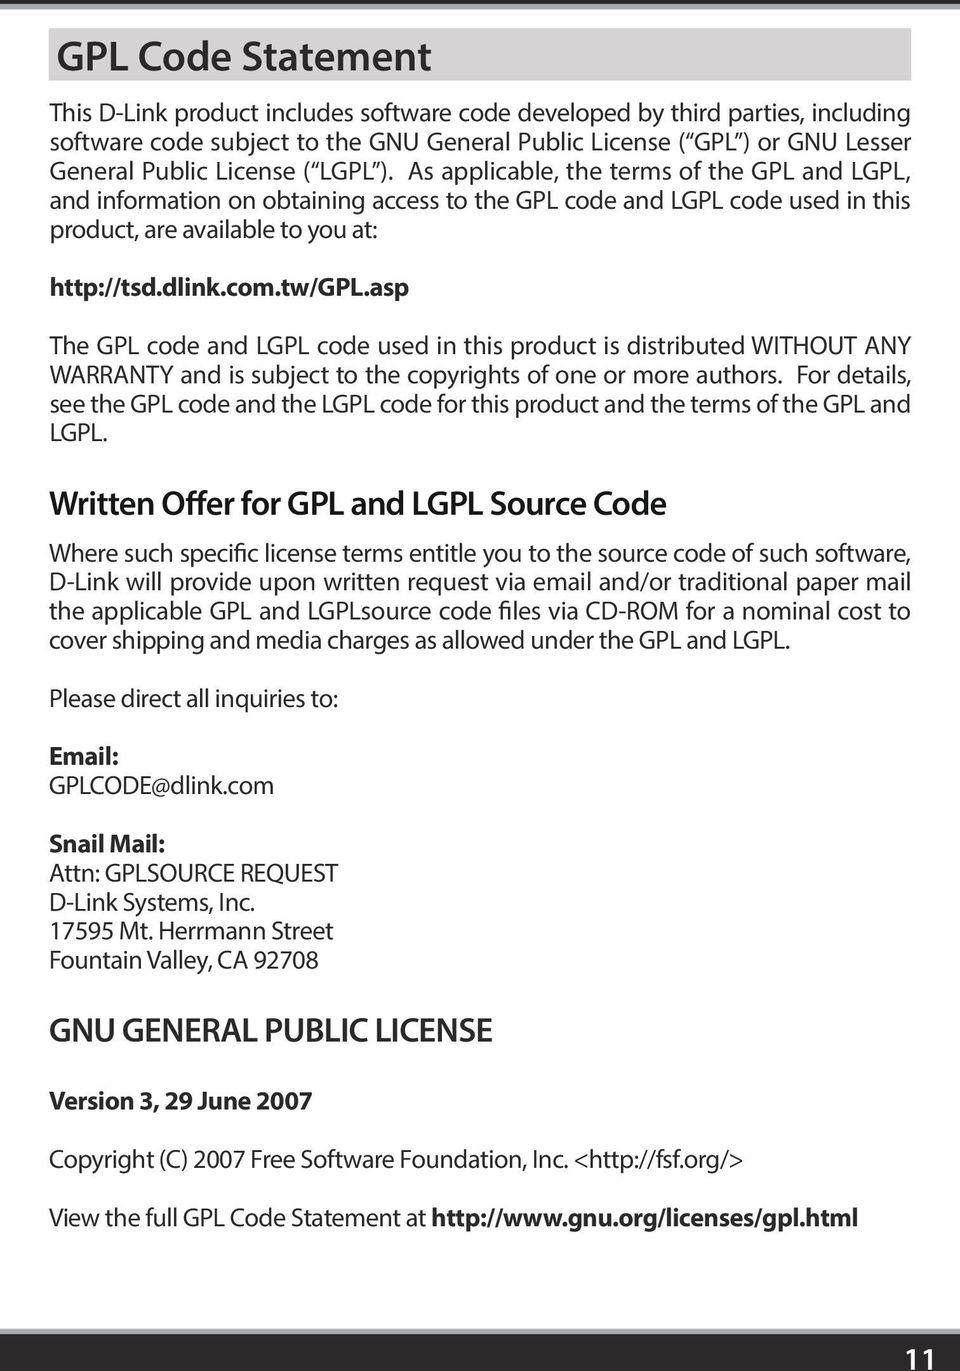 tw/gpl.asp The GPL code and LGPL code used in this product is distributed WITHOUT ANY WARRANTY and is subject to the copyrights of one or more authors.